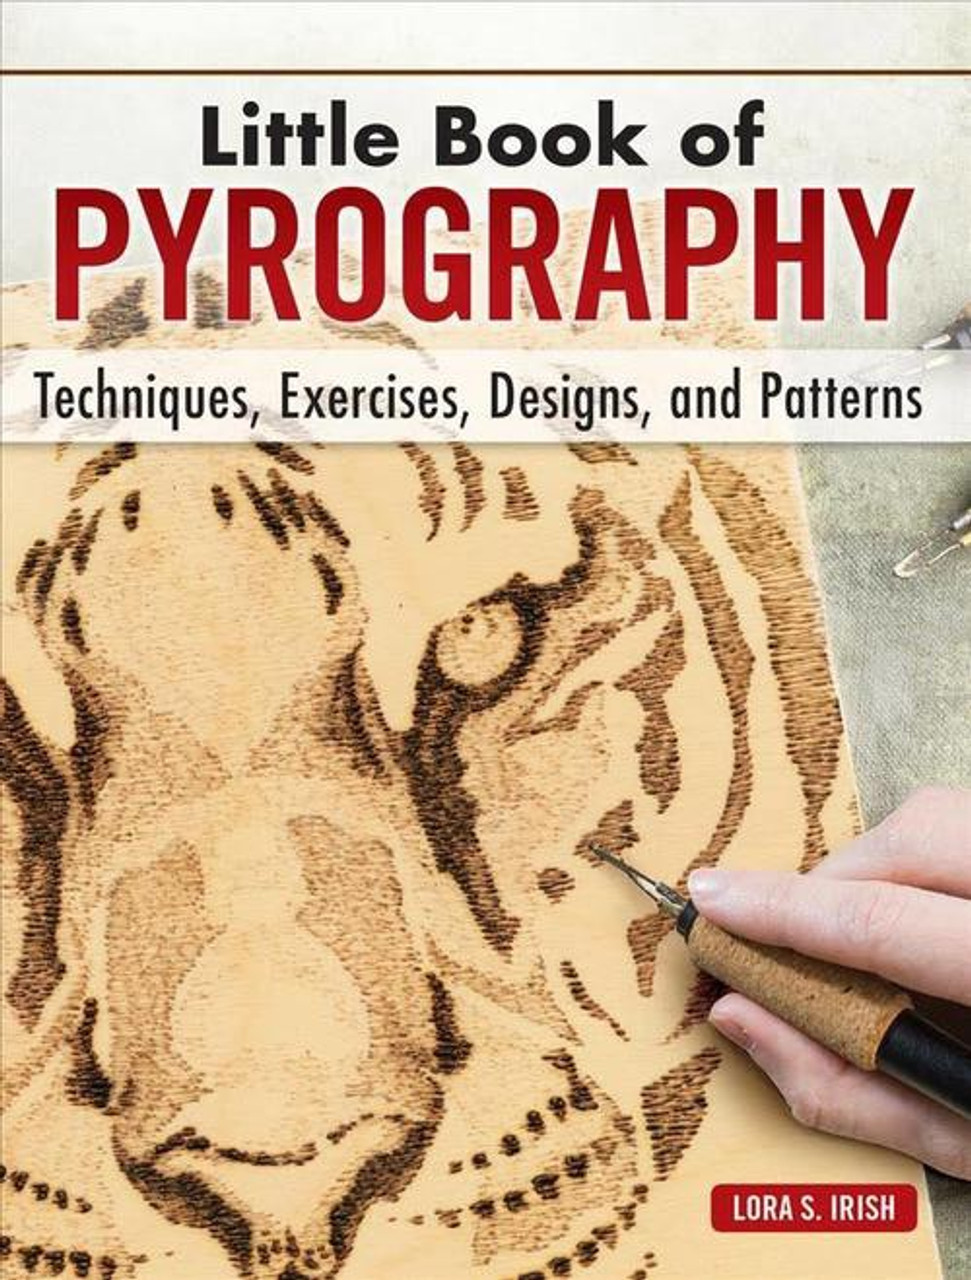 Pyrography for Beginners: A Step by Step Guide to Craft 15 Awesome Wood Burning Art, Patterns and Projects with Essential Woodburning Tools and Tips | Wood Burning Book for Kids and Adults [Book]